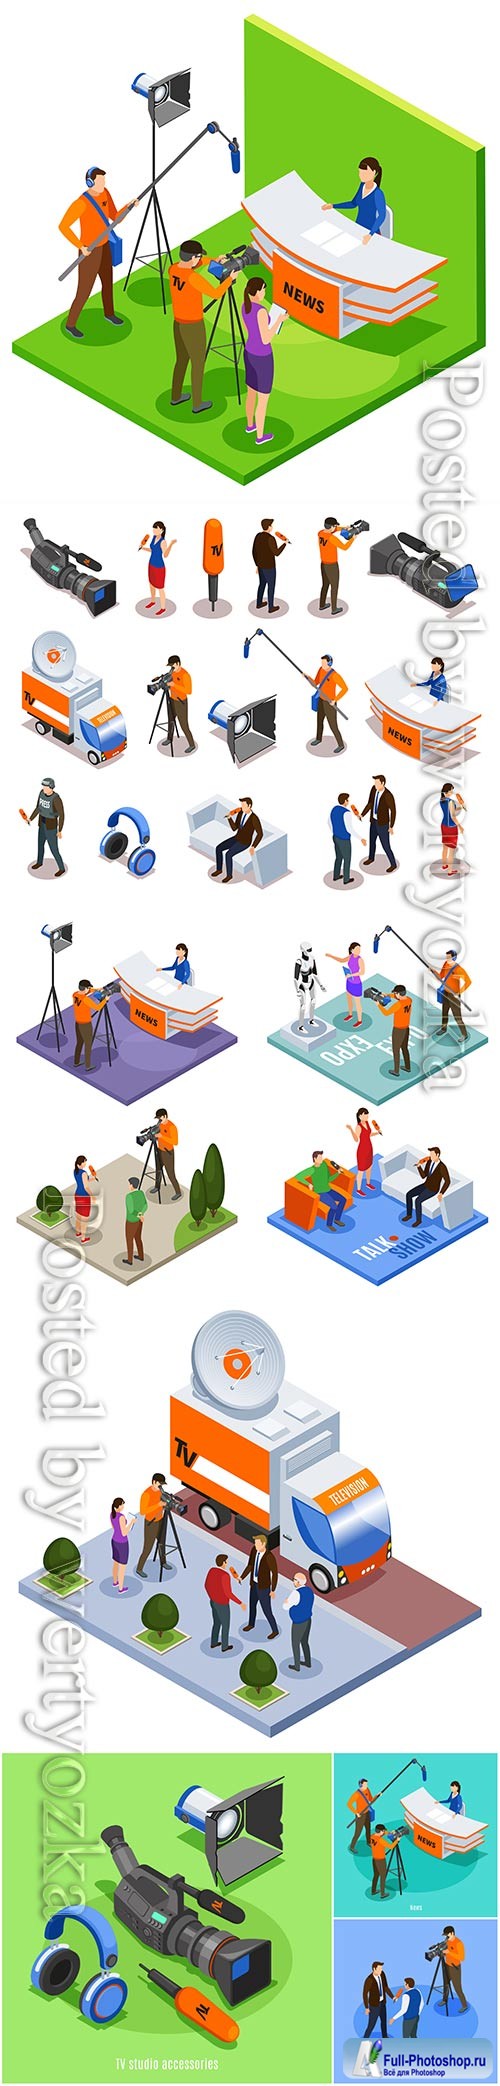 Concept set of talk show news expo and street interview isometric compositions vector